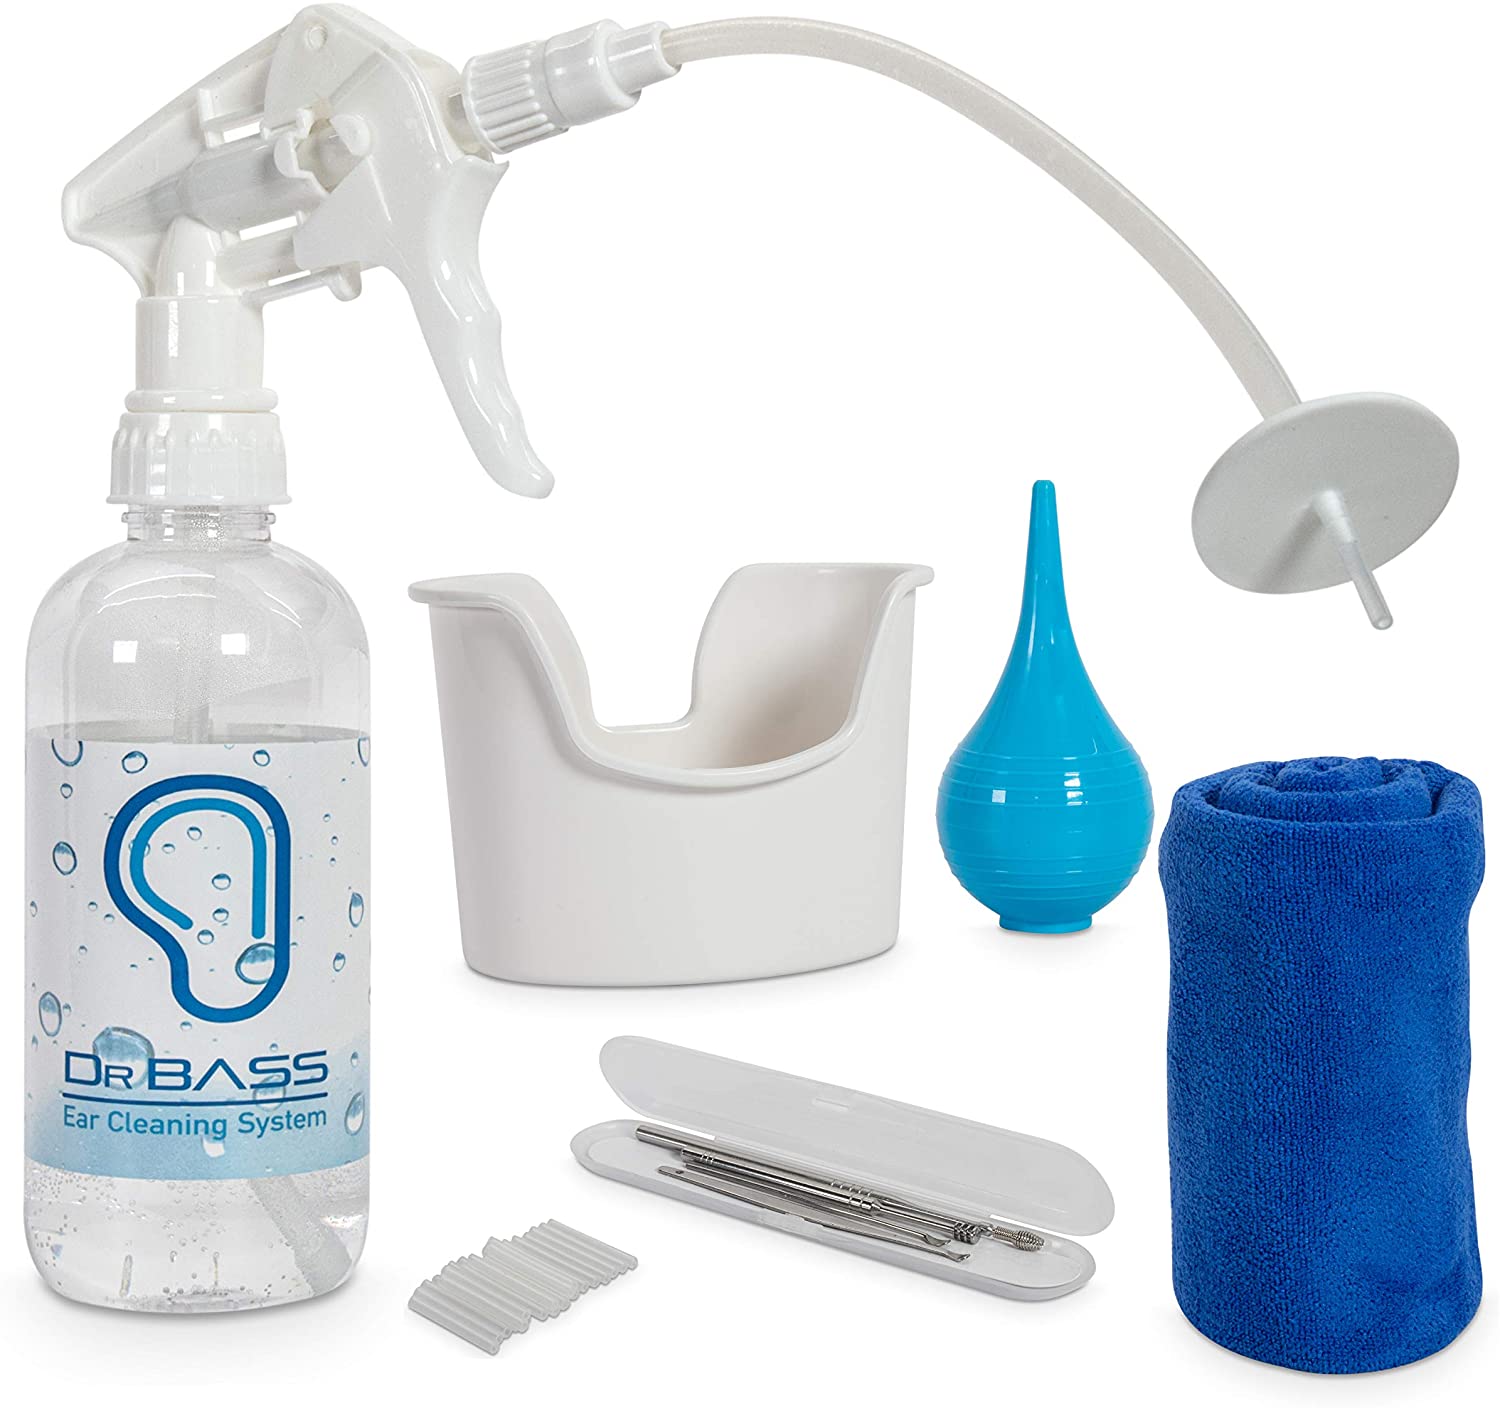 Ear Wax Removal Tool by Tilcare - Ear Irrigation Flushing System for Adults & Kids - Perfect Ear Cleaning Kit - Includes Basin, Towel and 25 Disposable Tips - e4cents